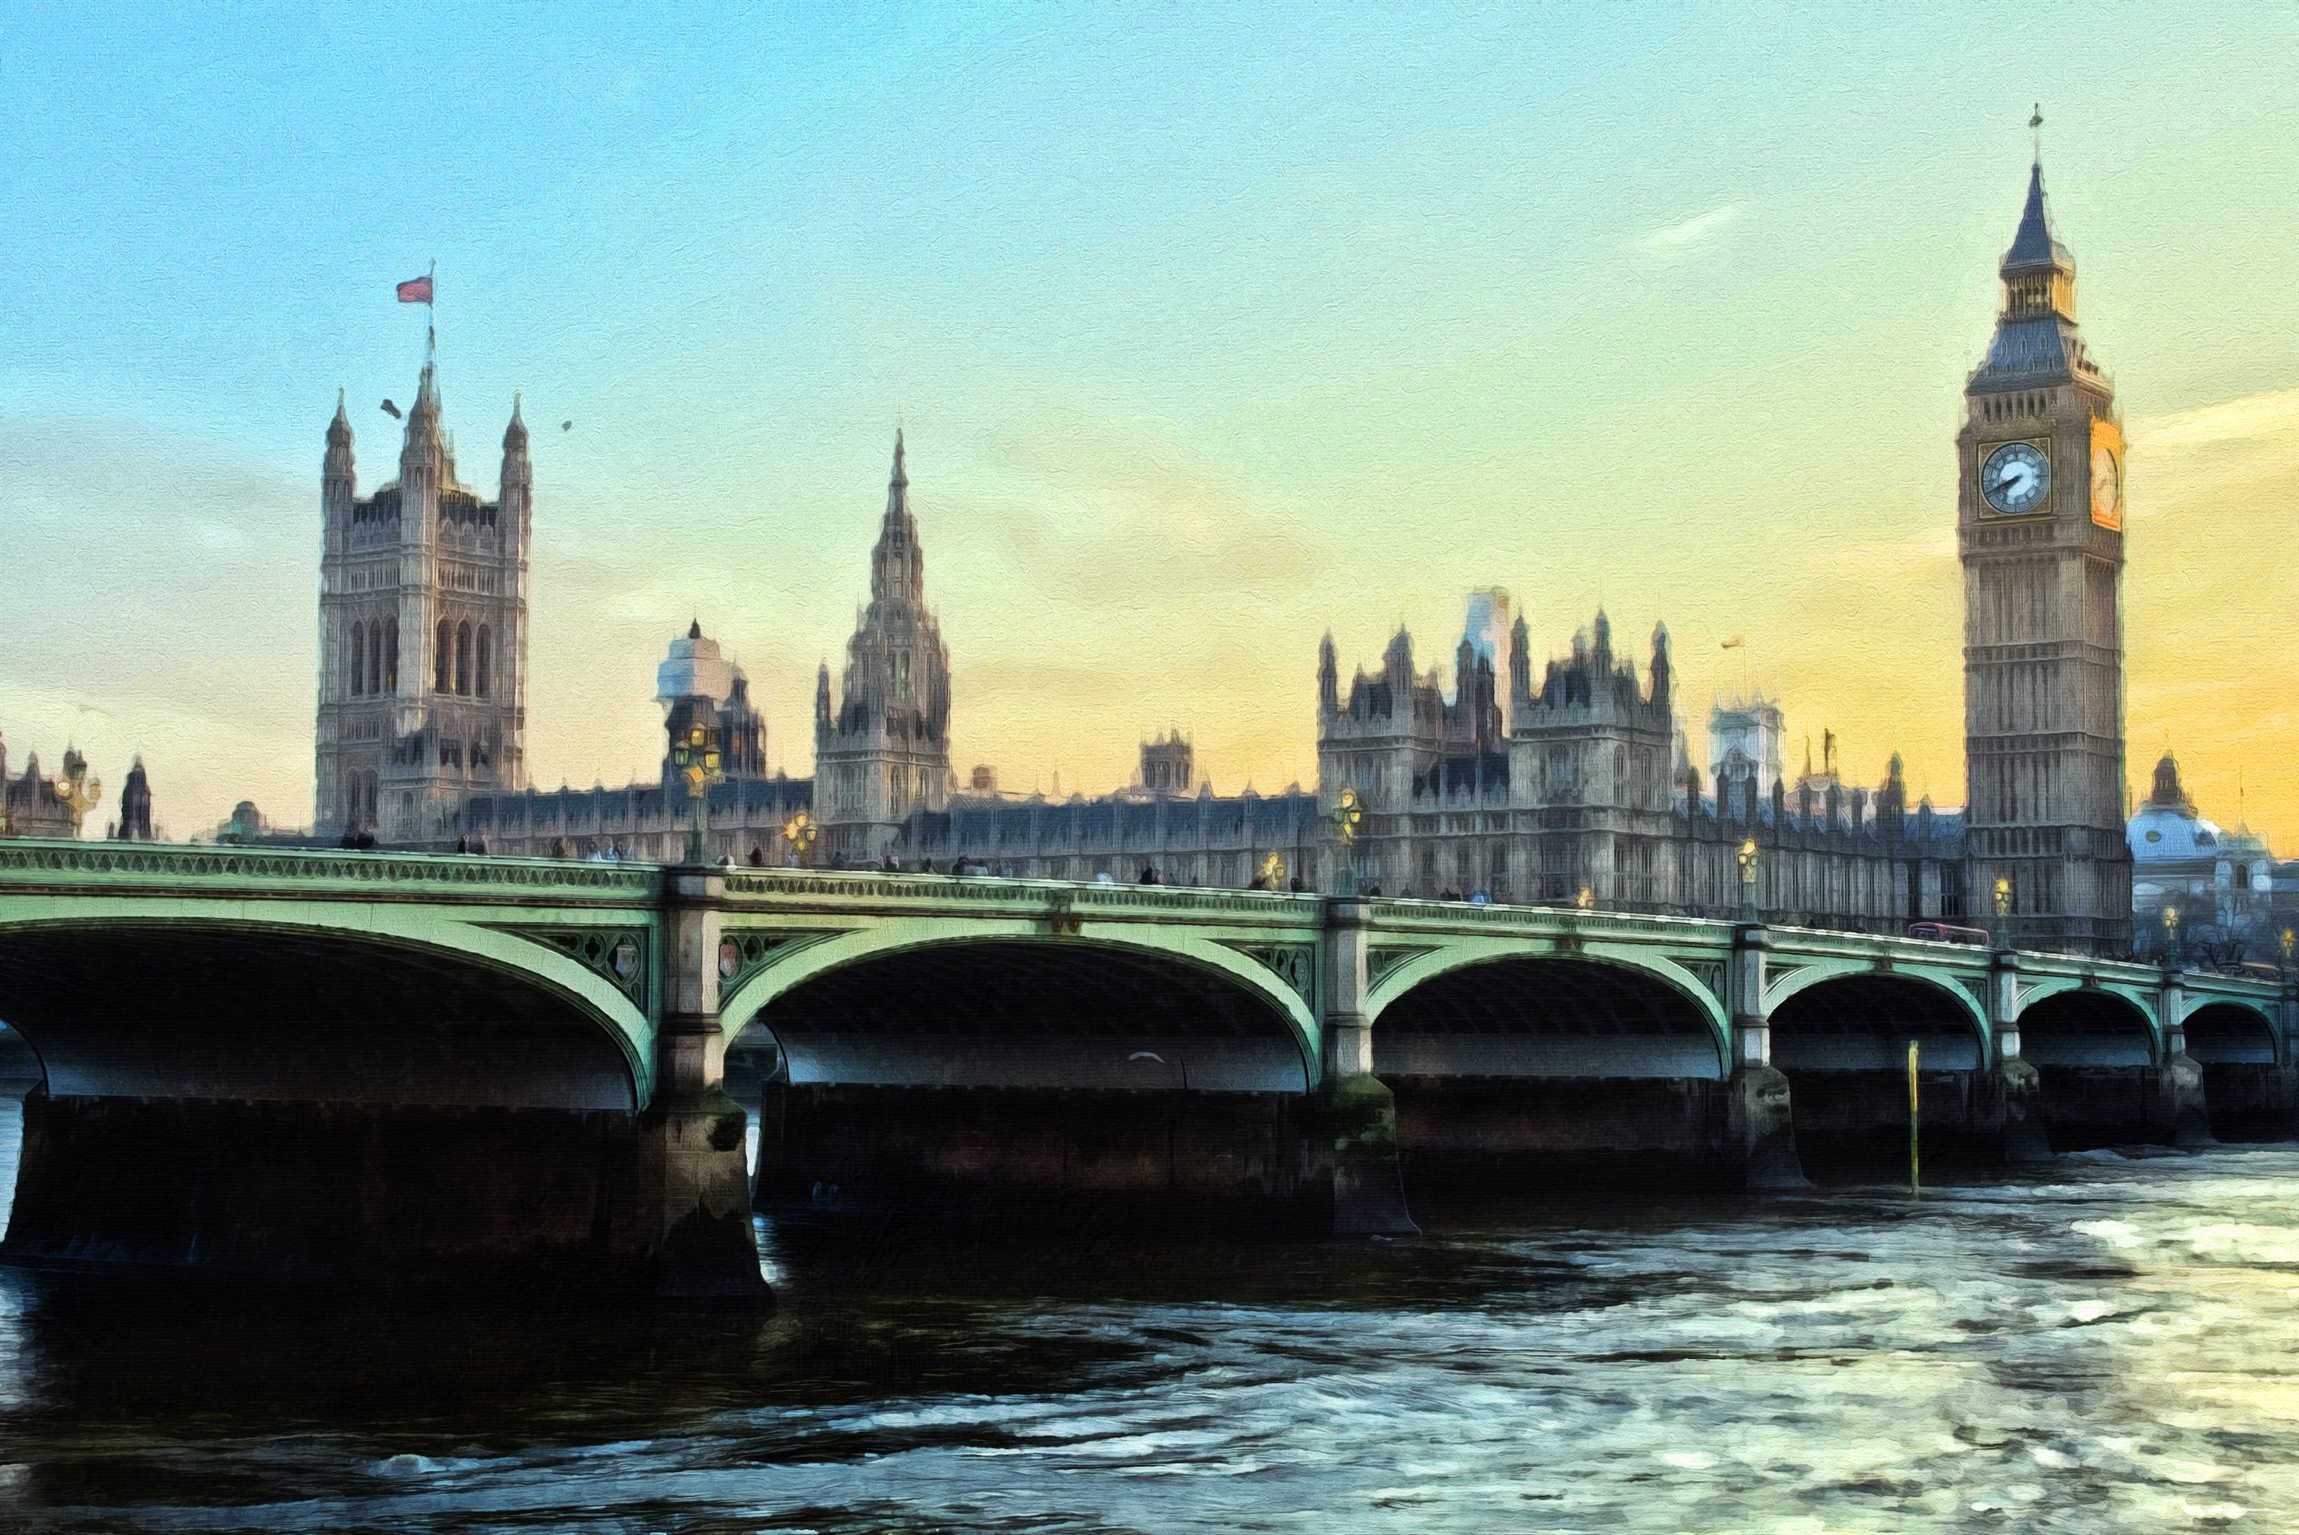 Oil Paint Photoshop Action - example 9 with London